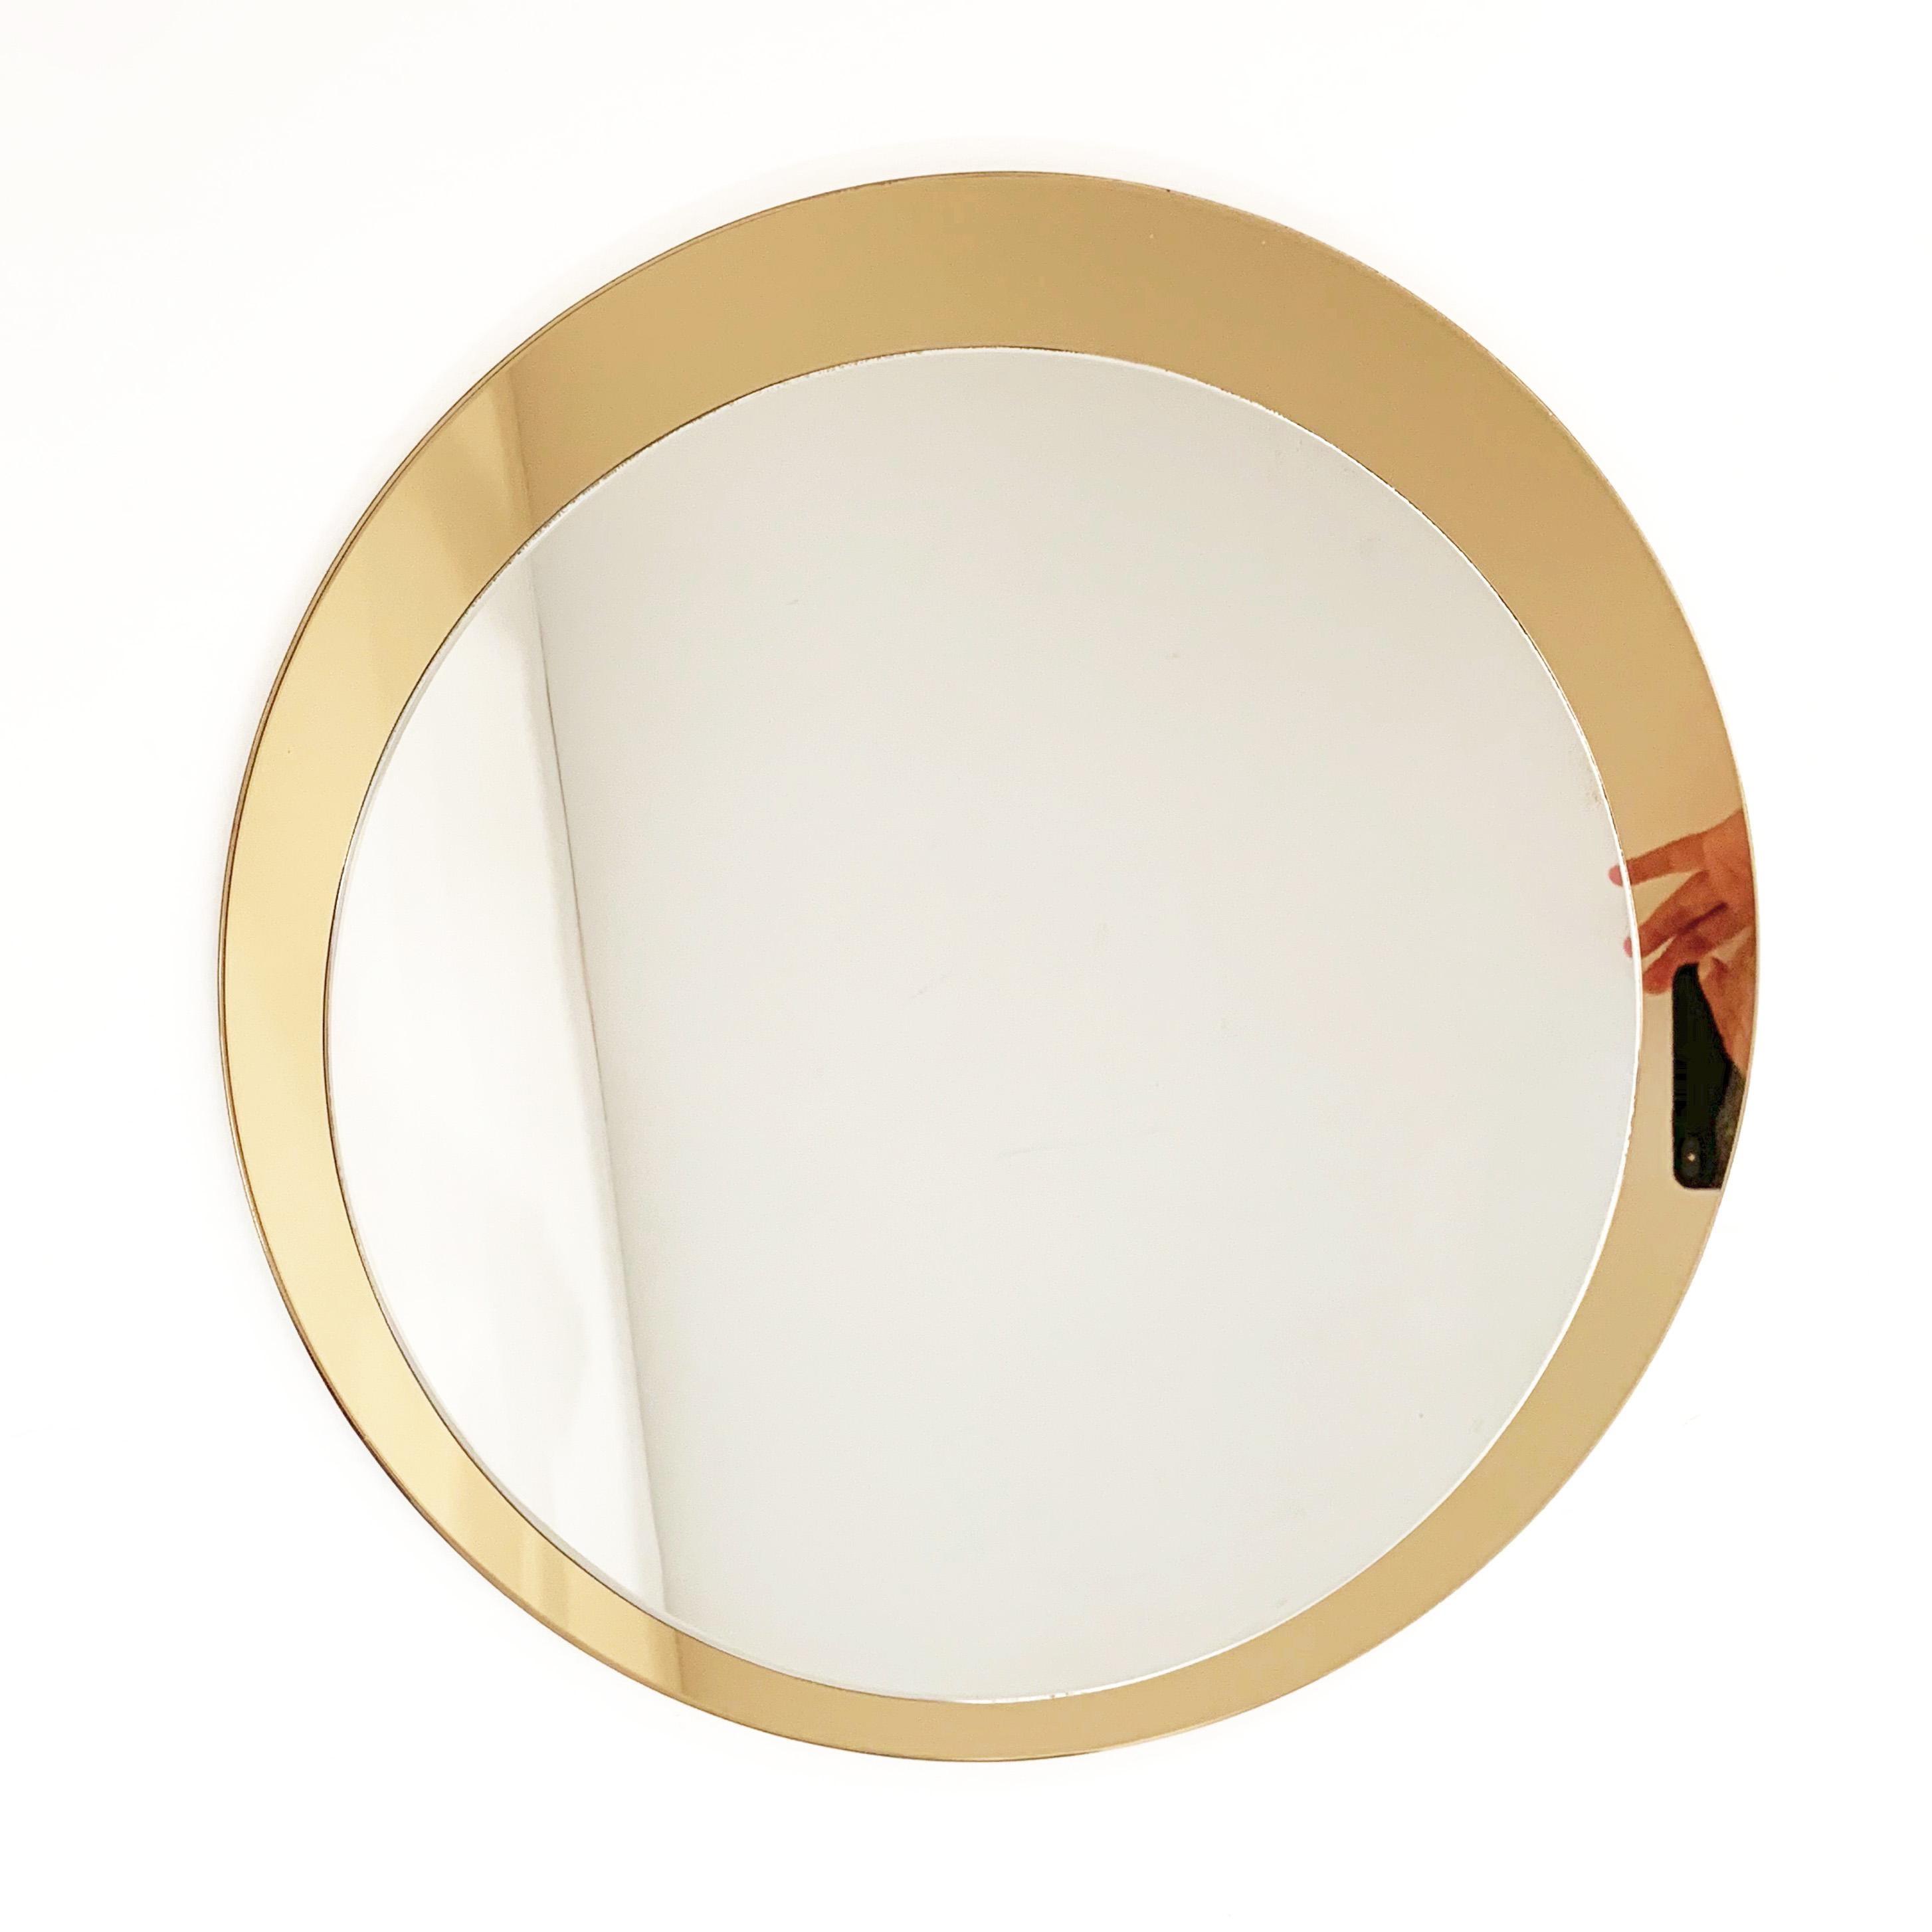 Galimberti Midcentury Italian Round Mirror with Double Brassed Gold Frame, 1975 For Sale 3